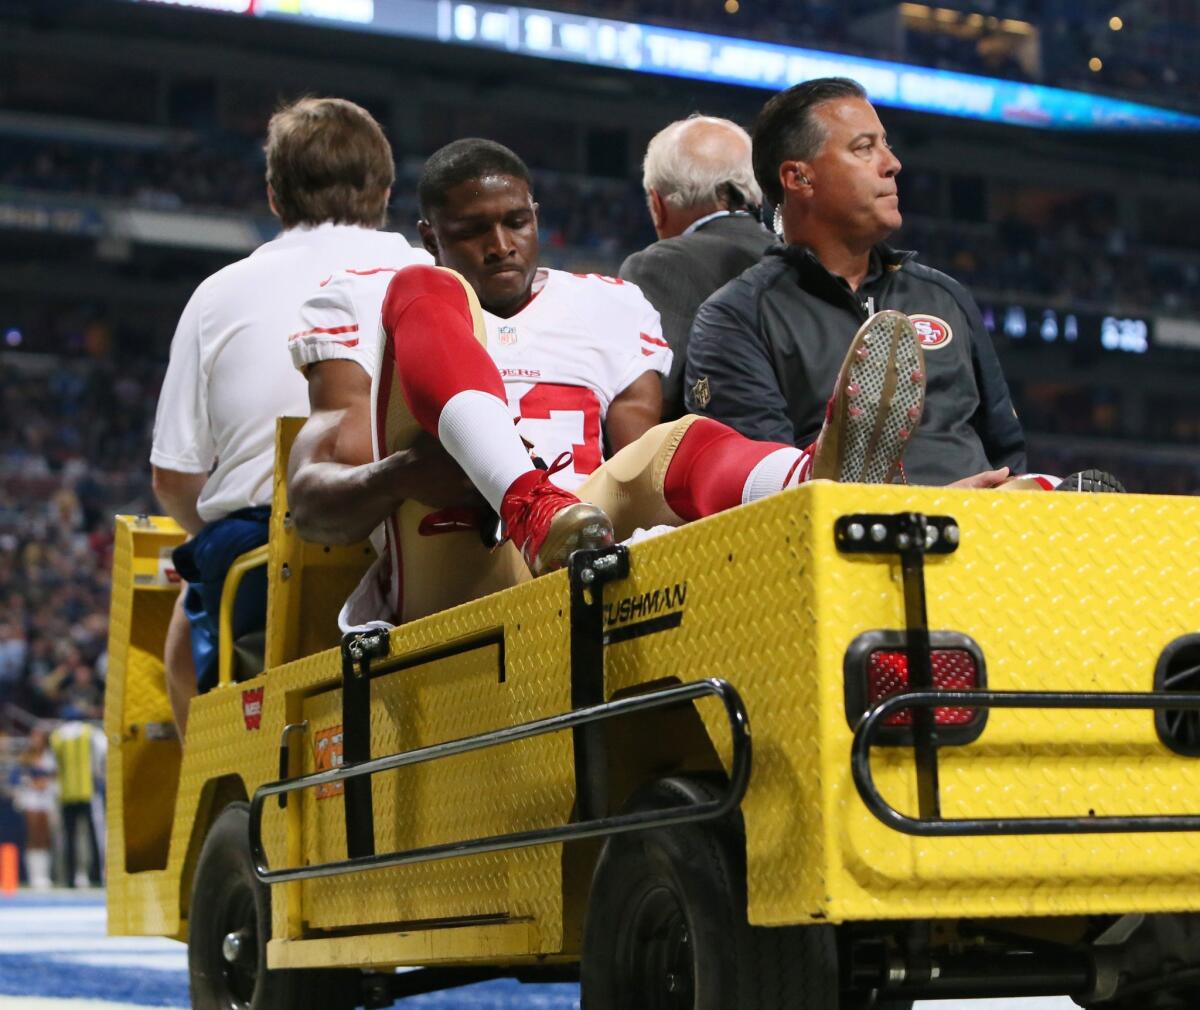 San Francisco running back Reggie Bush is carted off the field after being injured in St. Louis on Nov. 1.